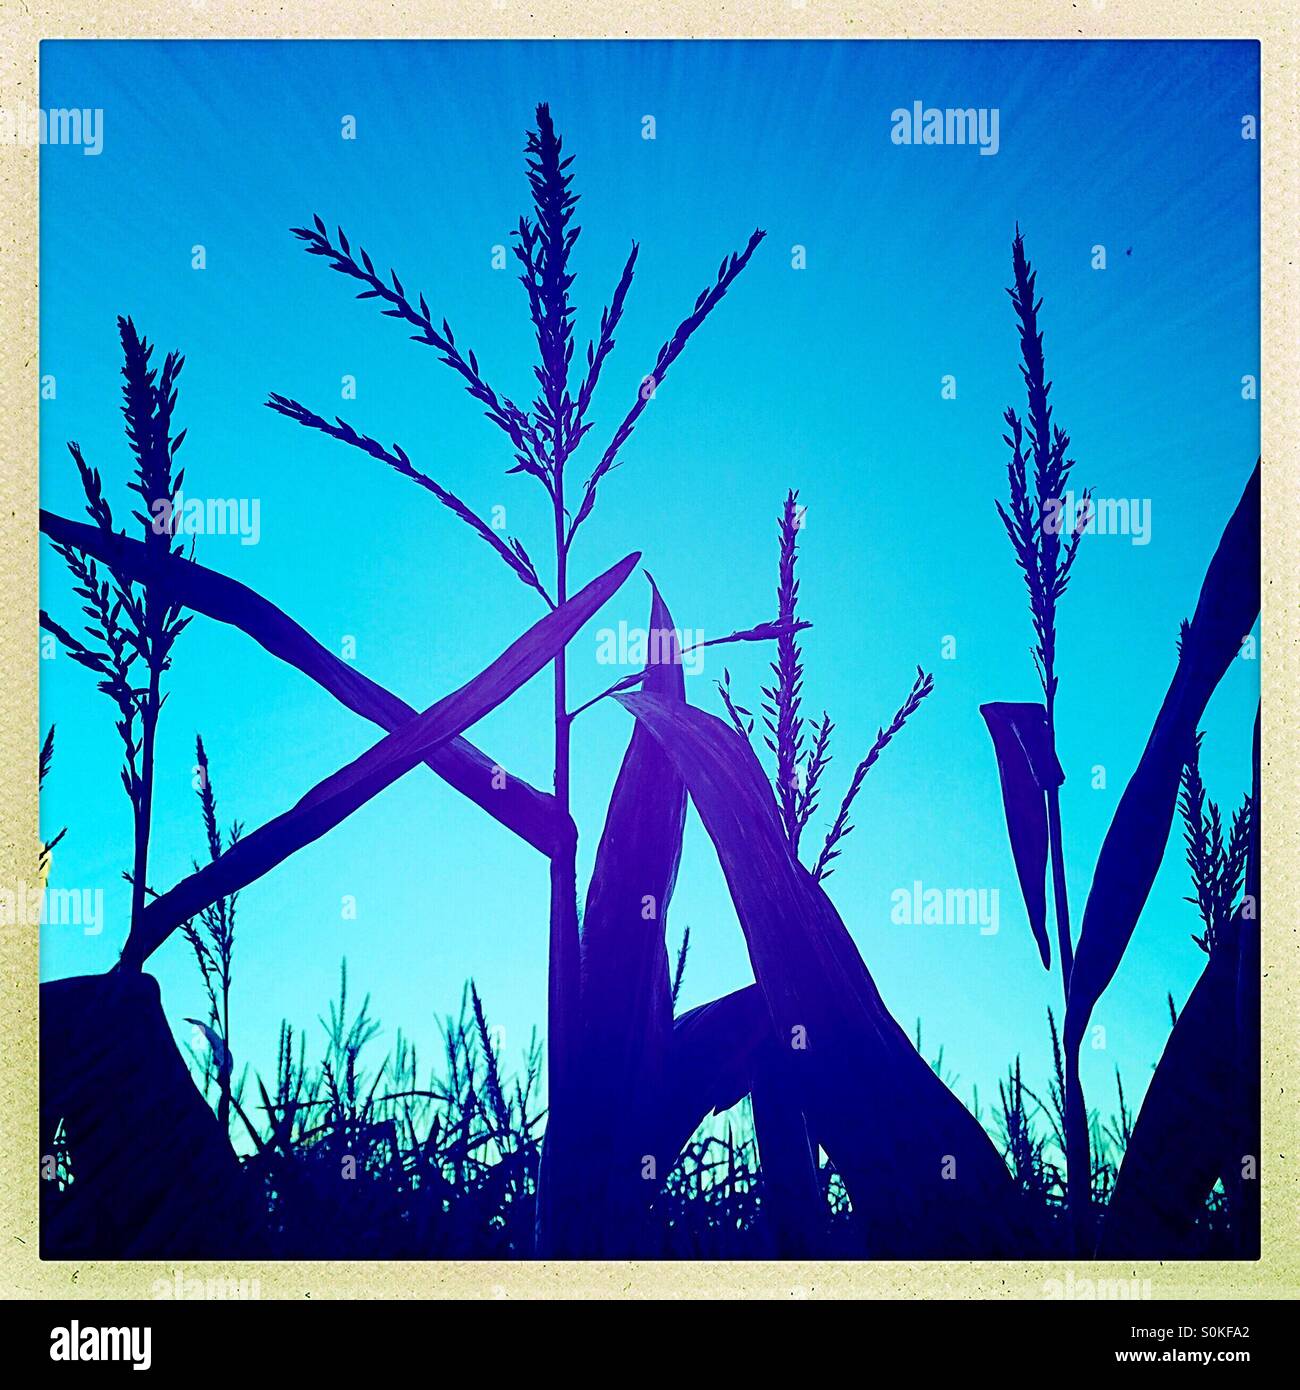 Corn tassels silhouetted against a blue sky Stock Photo